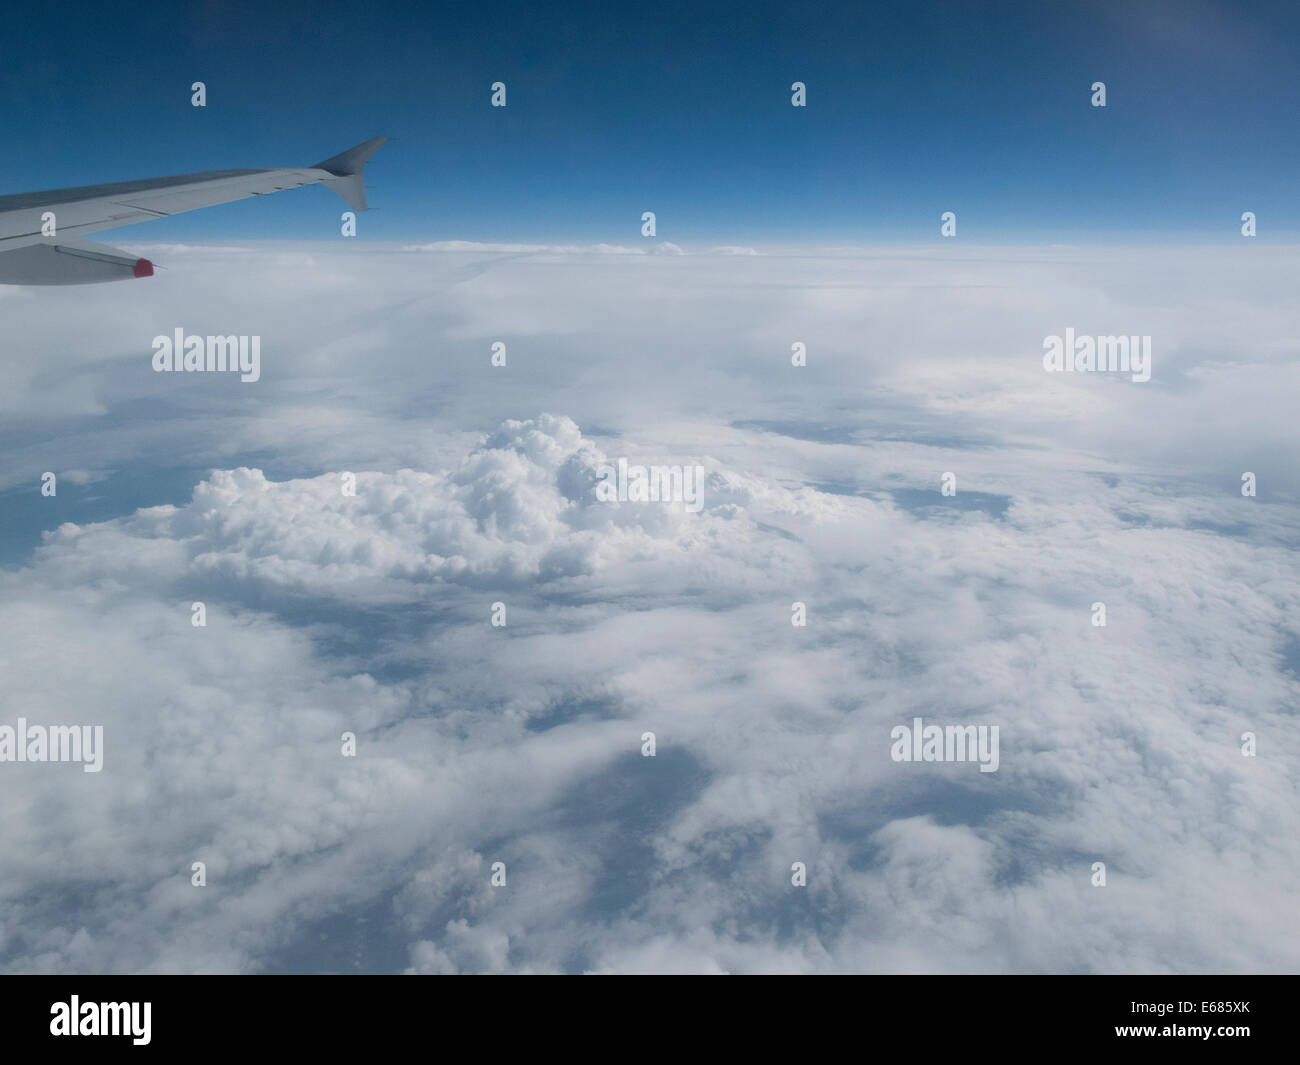 Thick clouds seen from high flying airliner over northern Europe Stock Photo